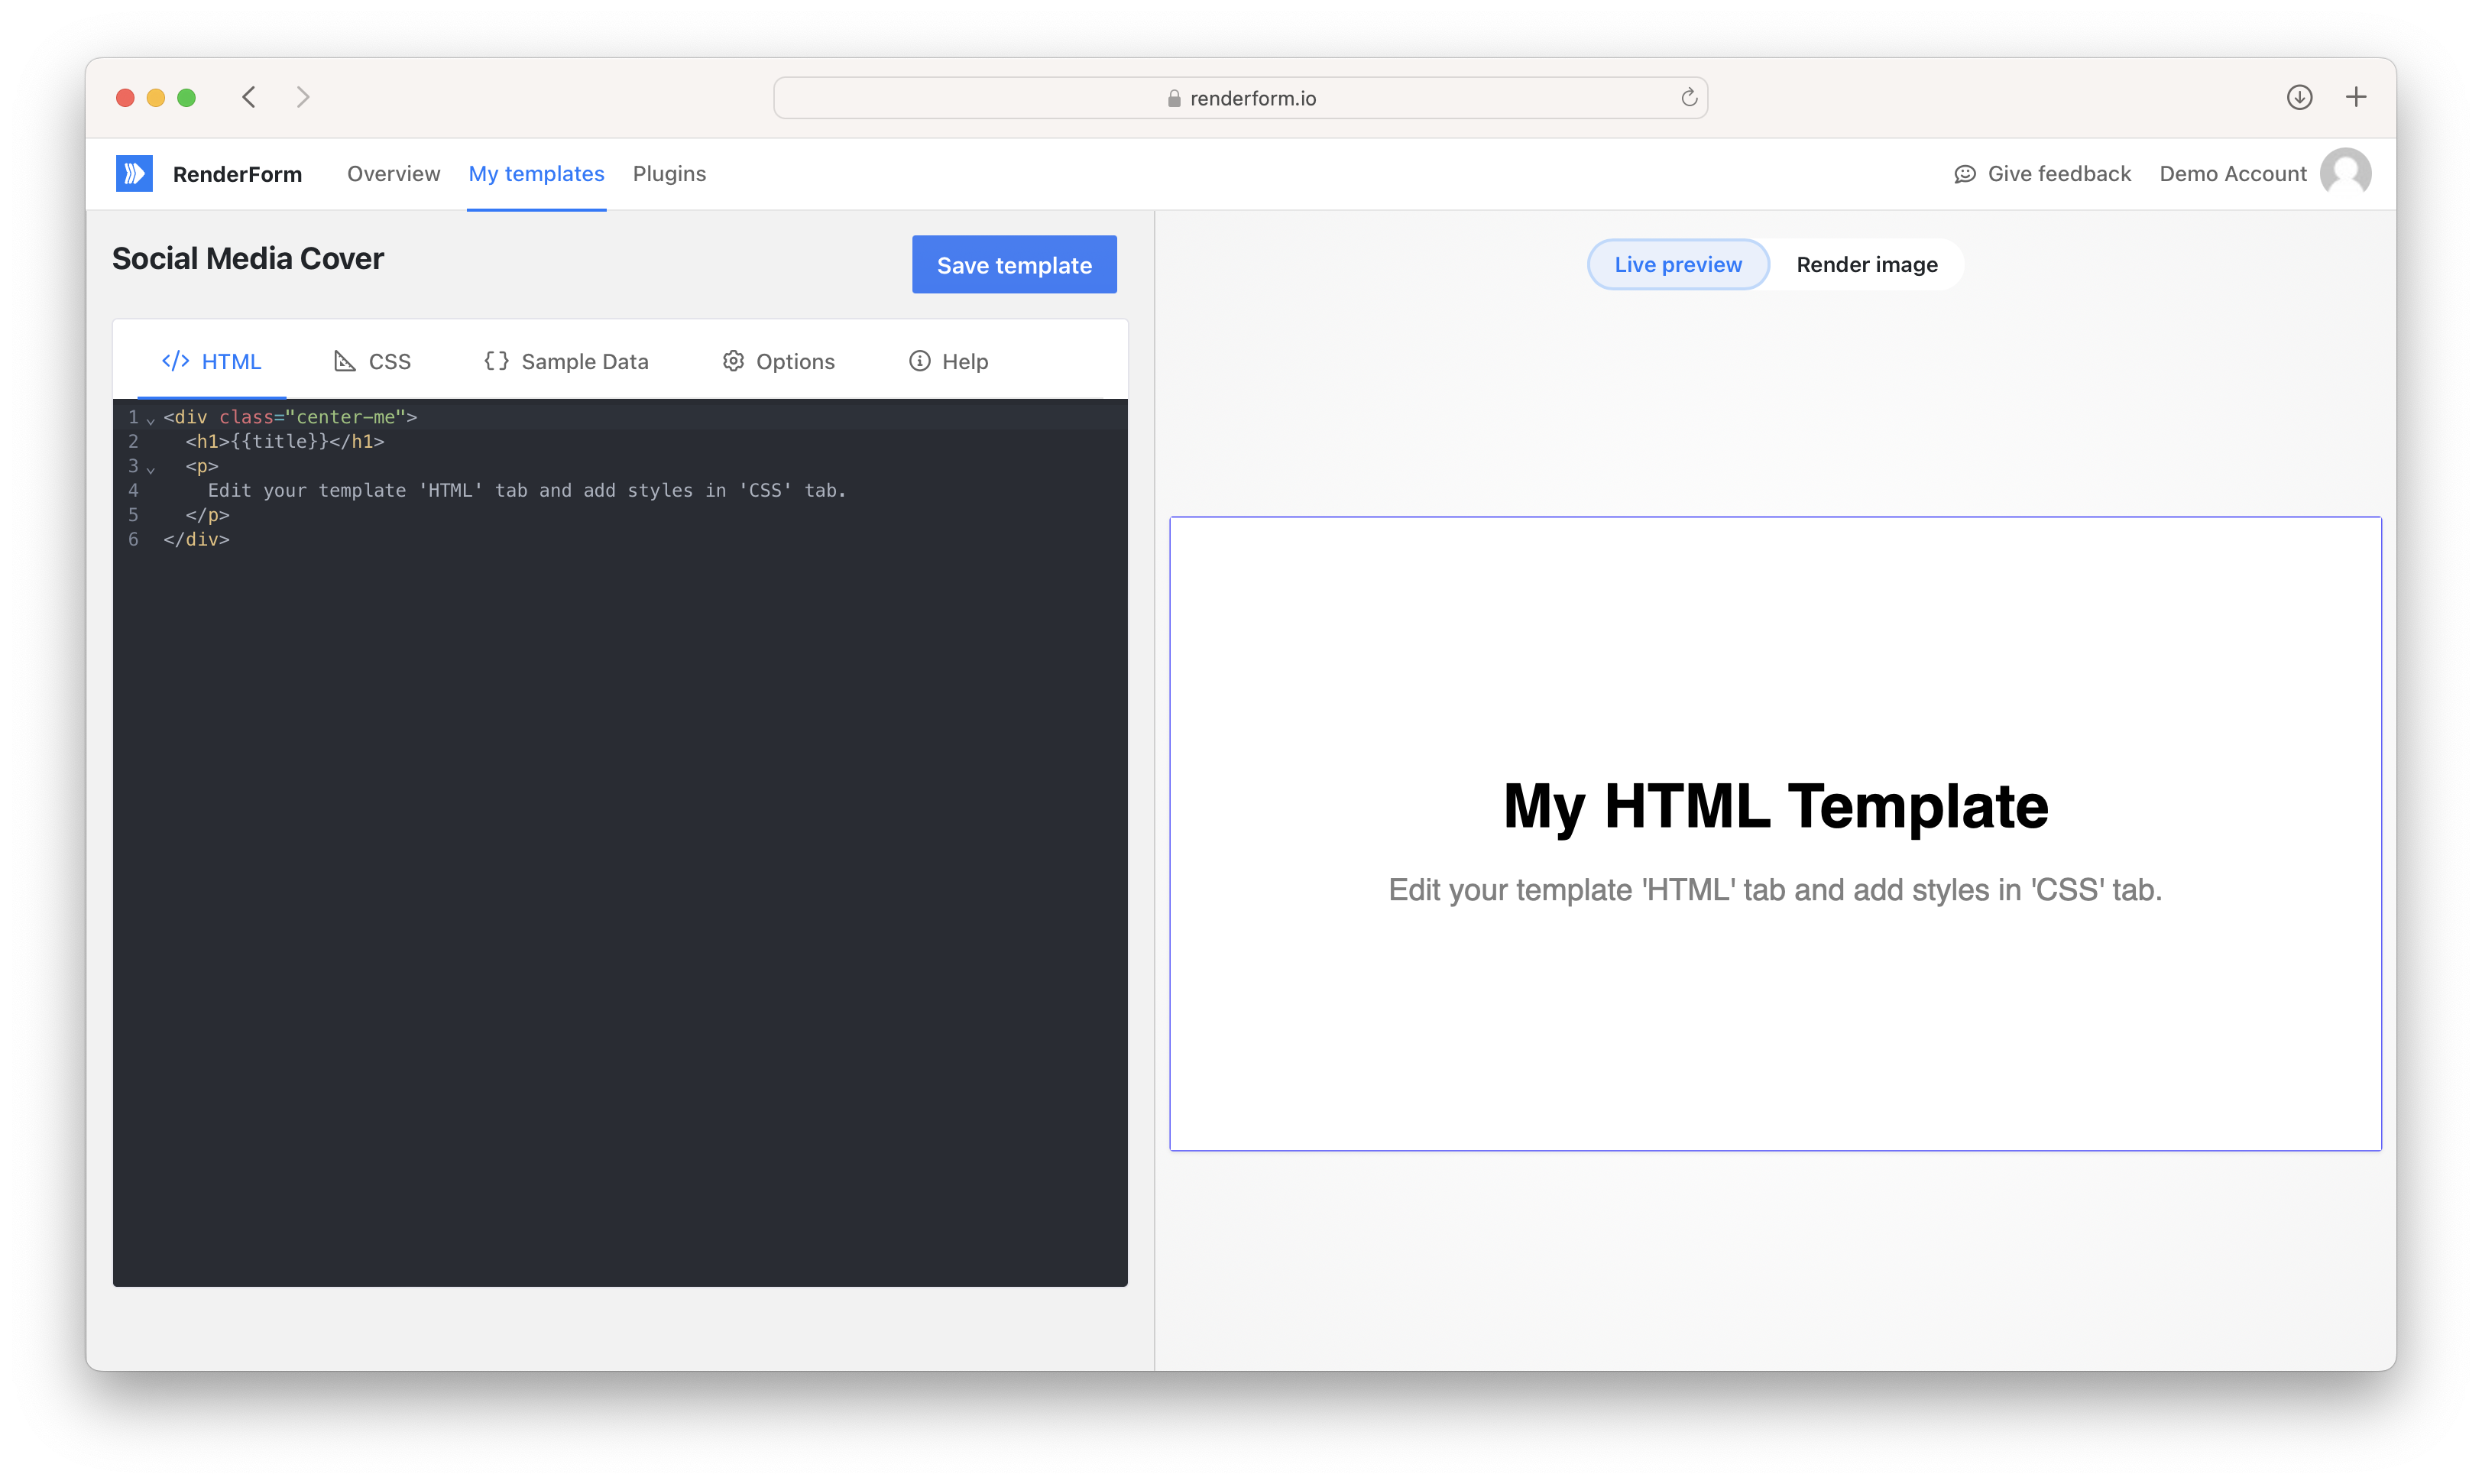 HTML Template Editor for Image Generation